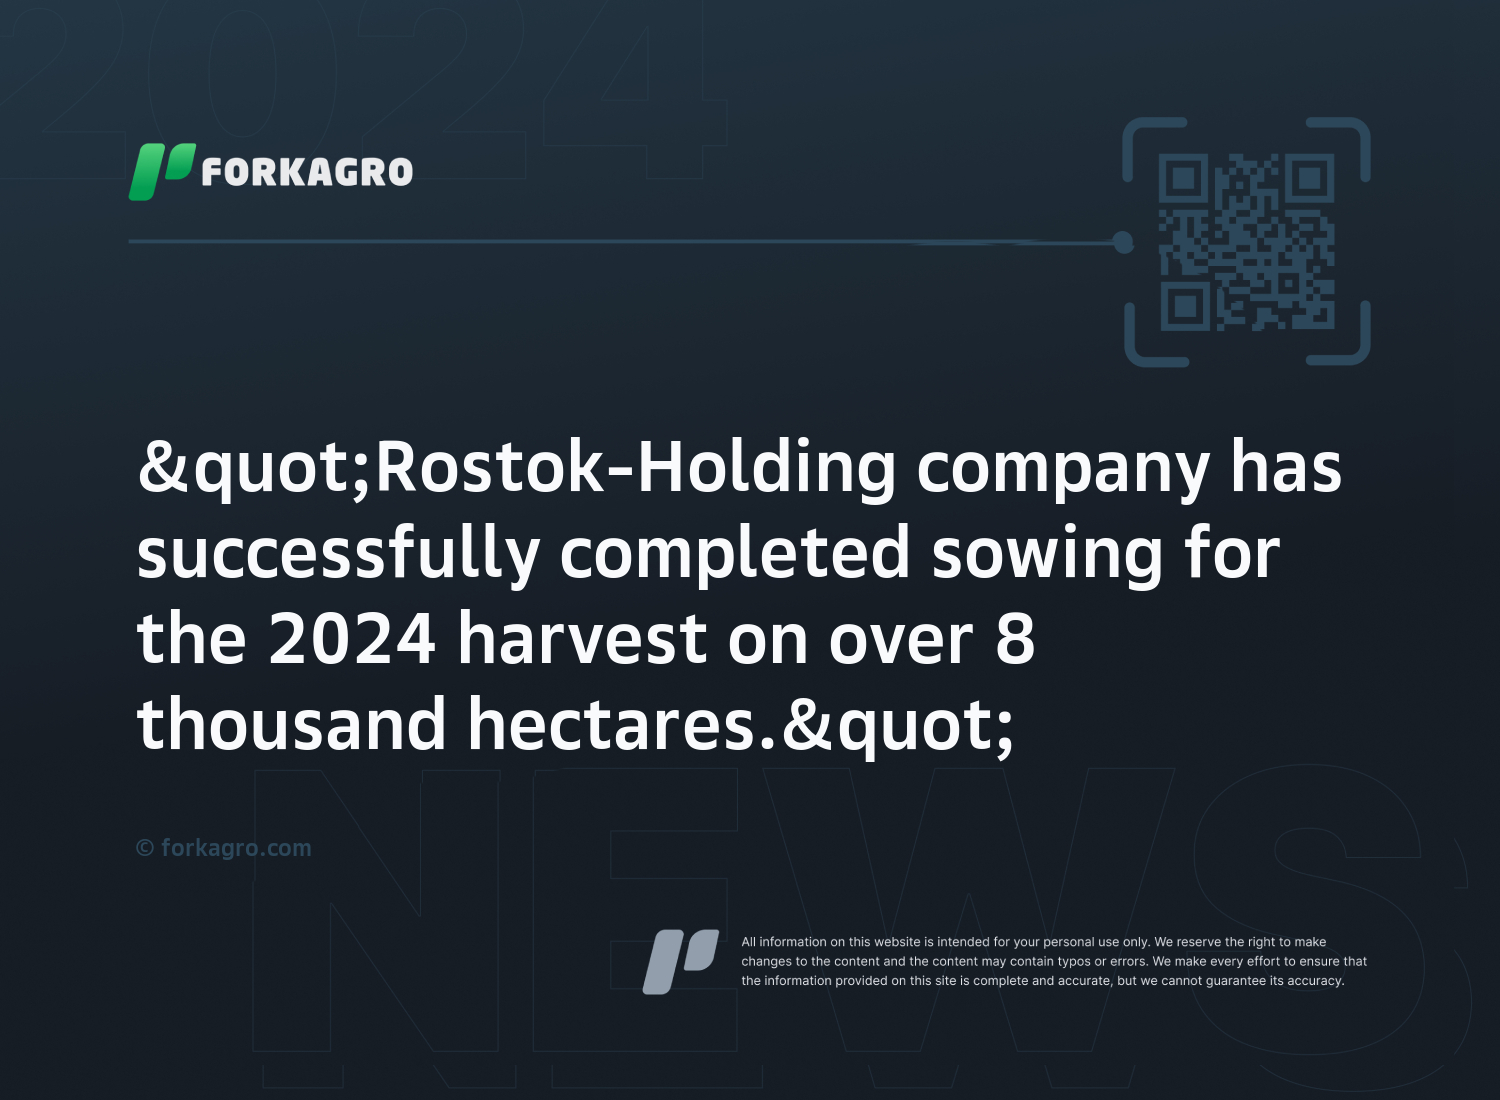 "Rostok-Holding company has successfully completed sowing for the 2024 harvest on over 8 thousand hectares."